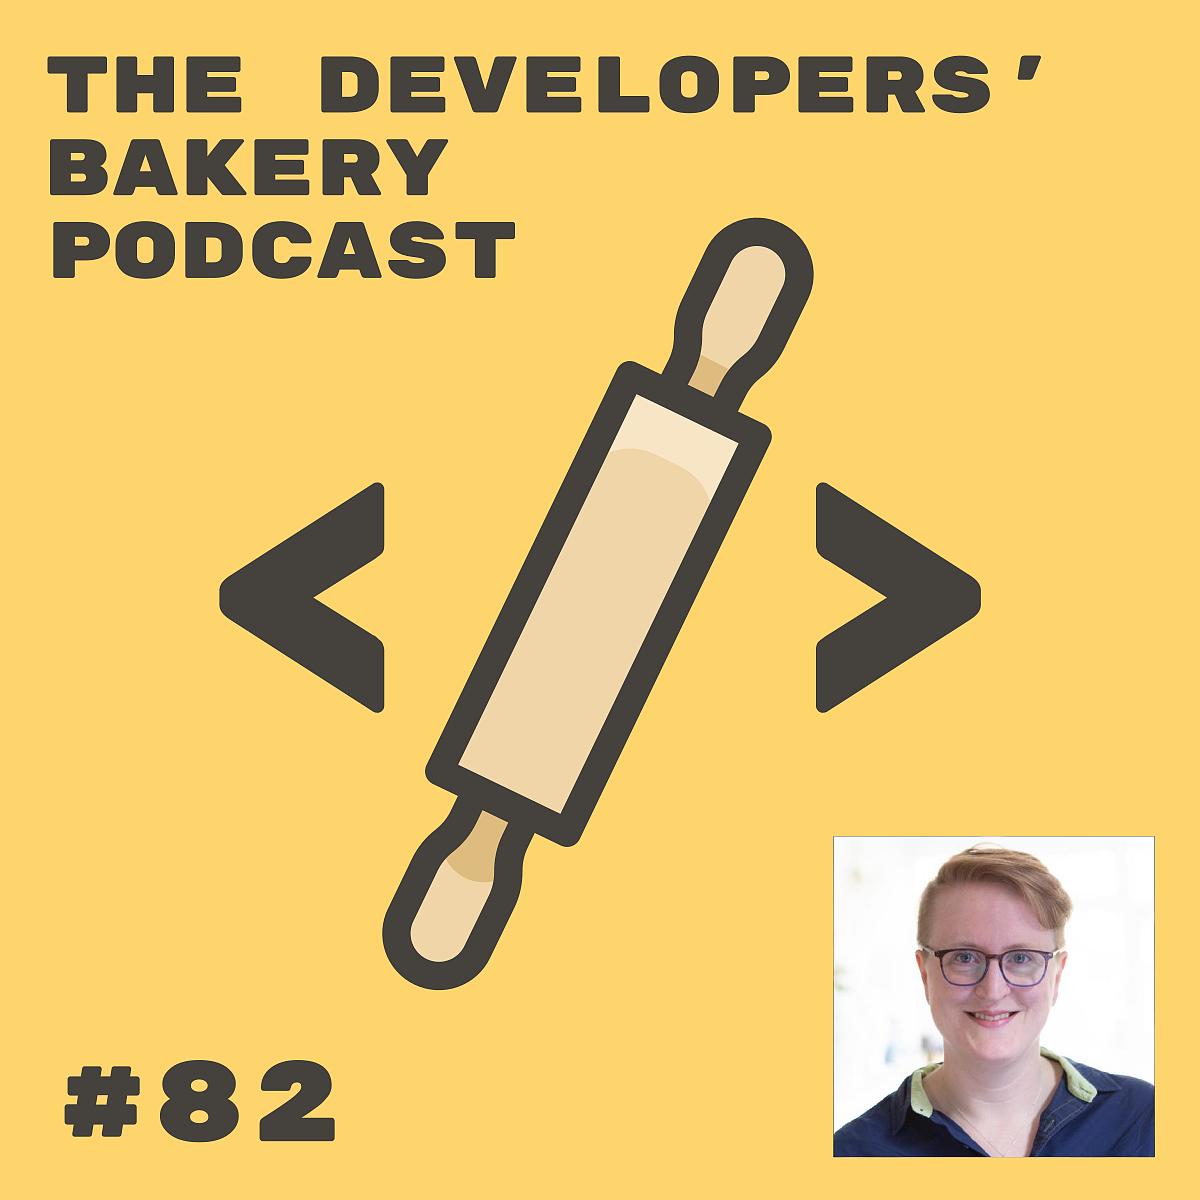 The Developers’ Bakery Podcast #82